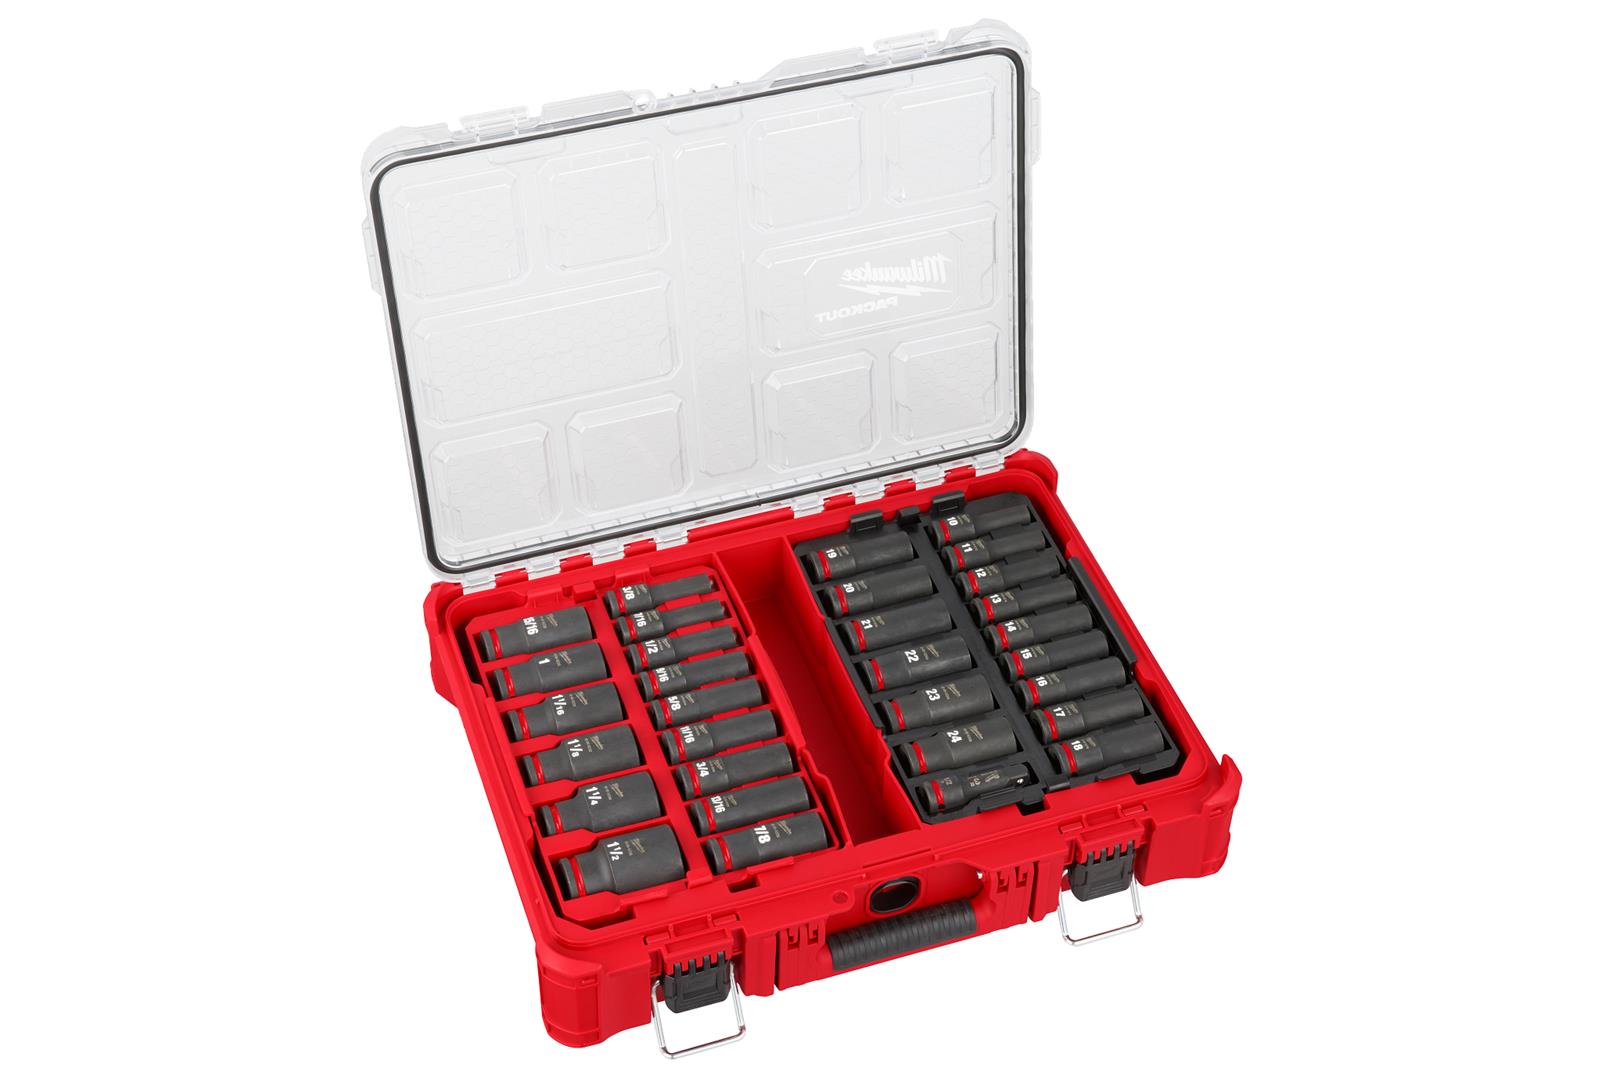 Milwaukee PACKOUT Tool Box - Performance Bodies